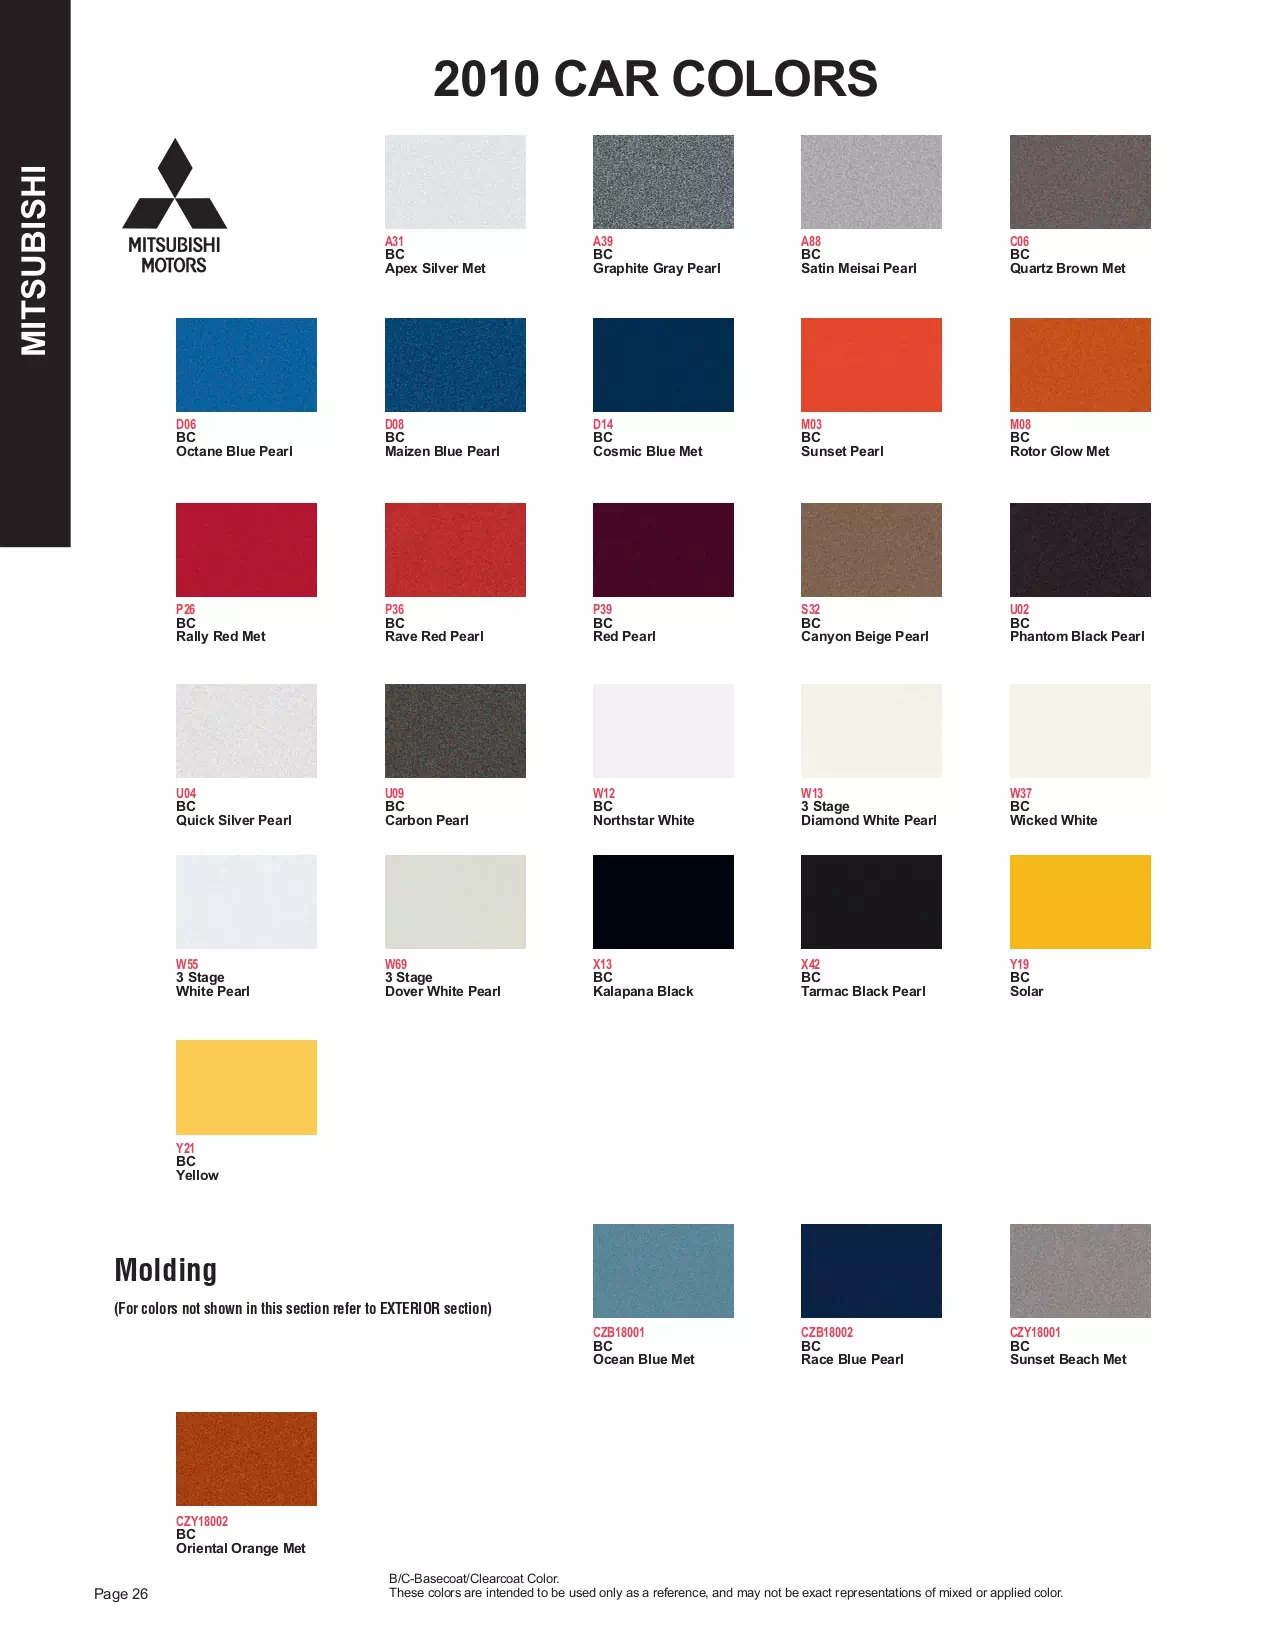 a color chart showing 2010 Mitsubishi exterior paint codes, and their color names.